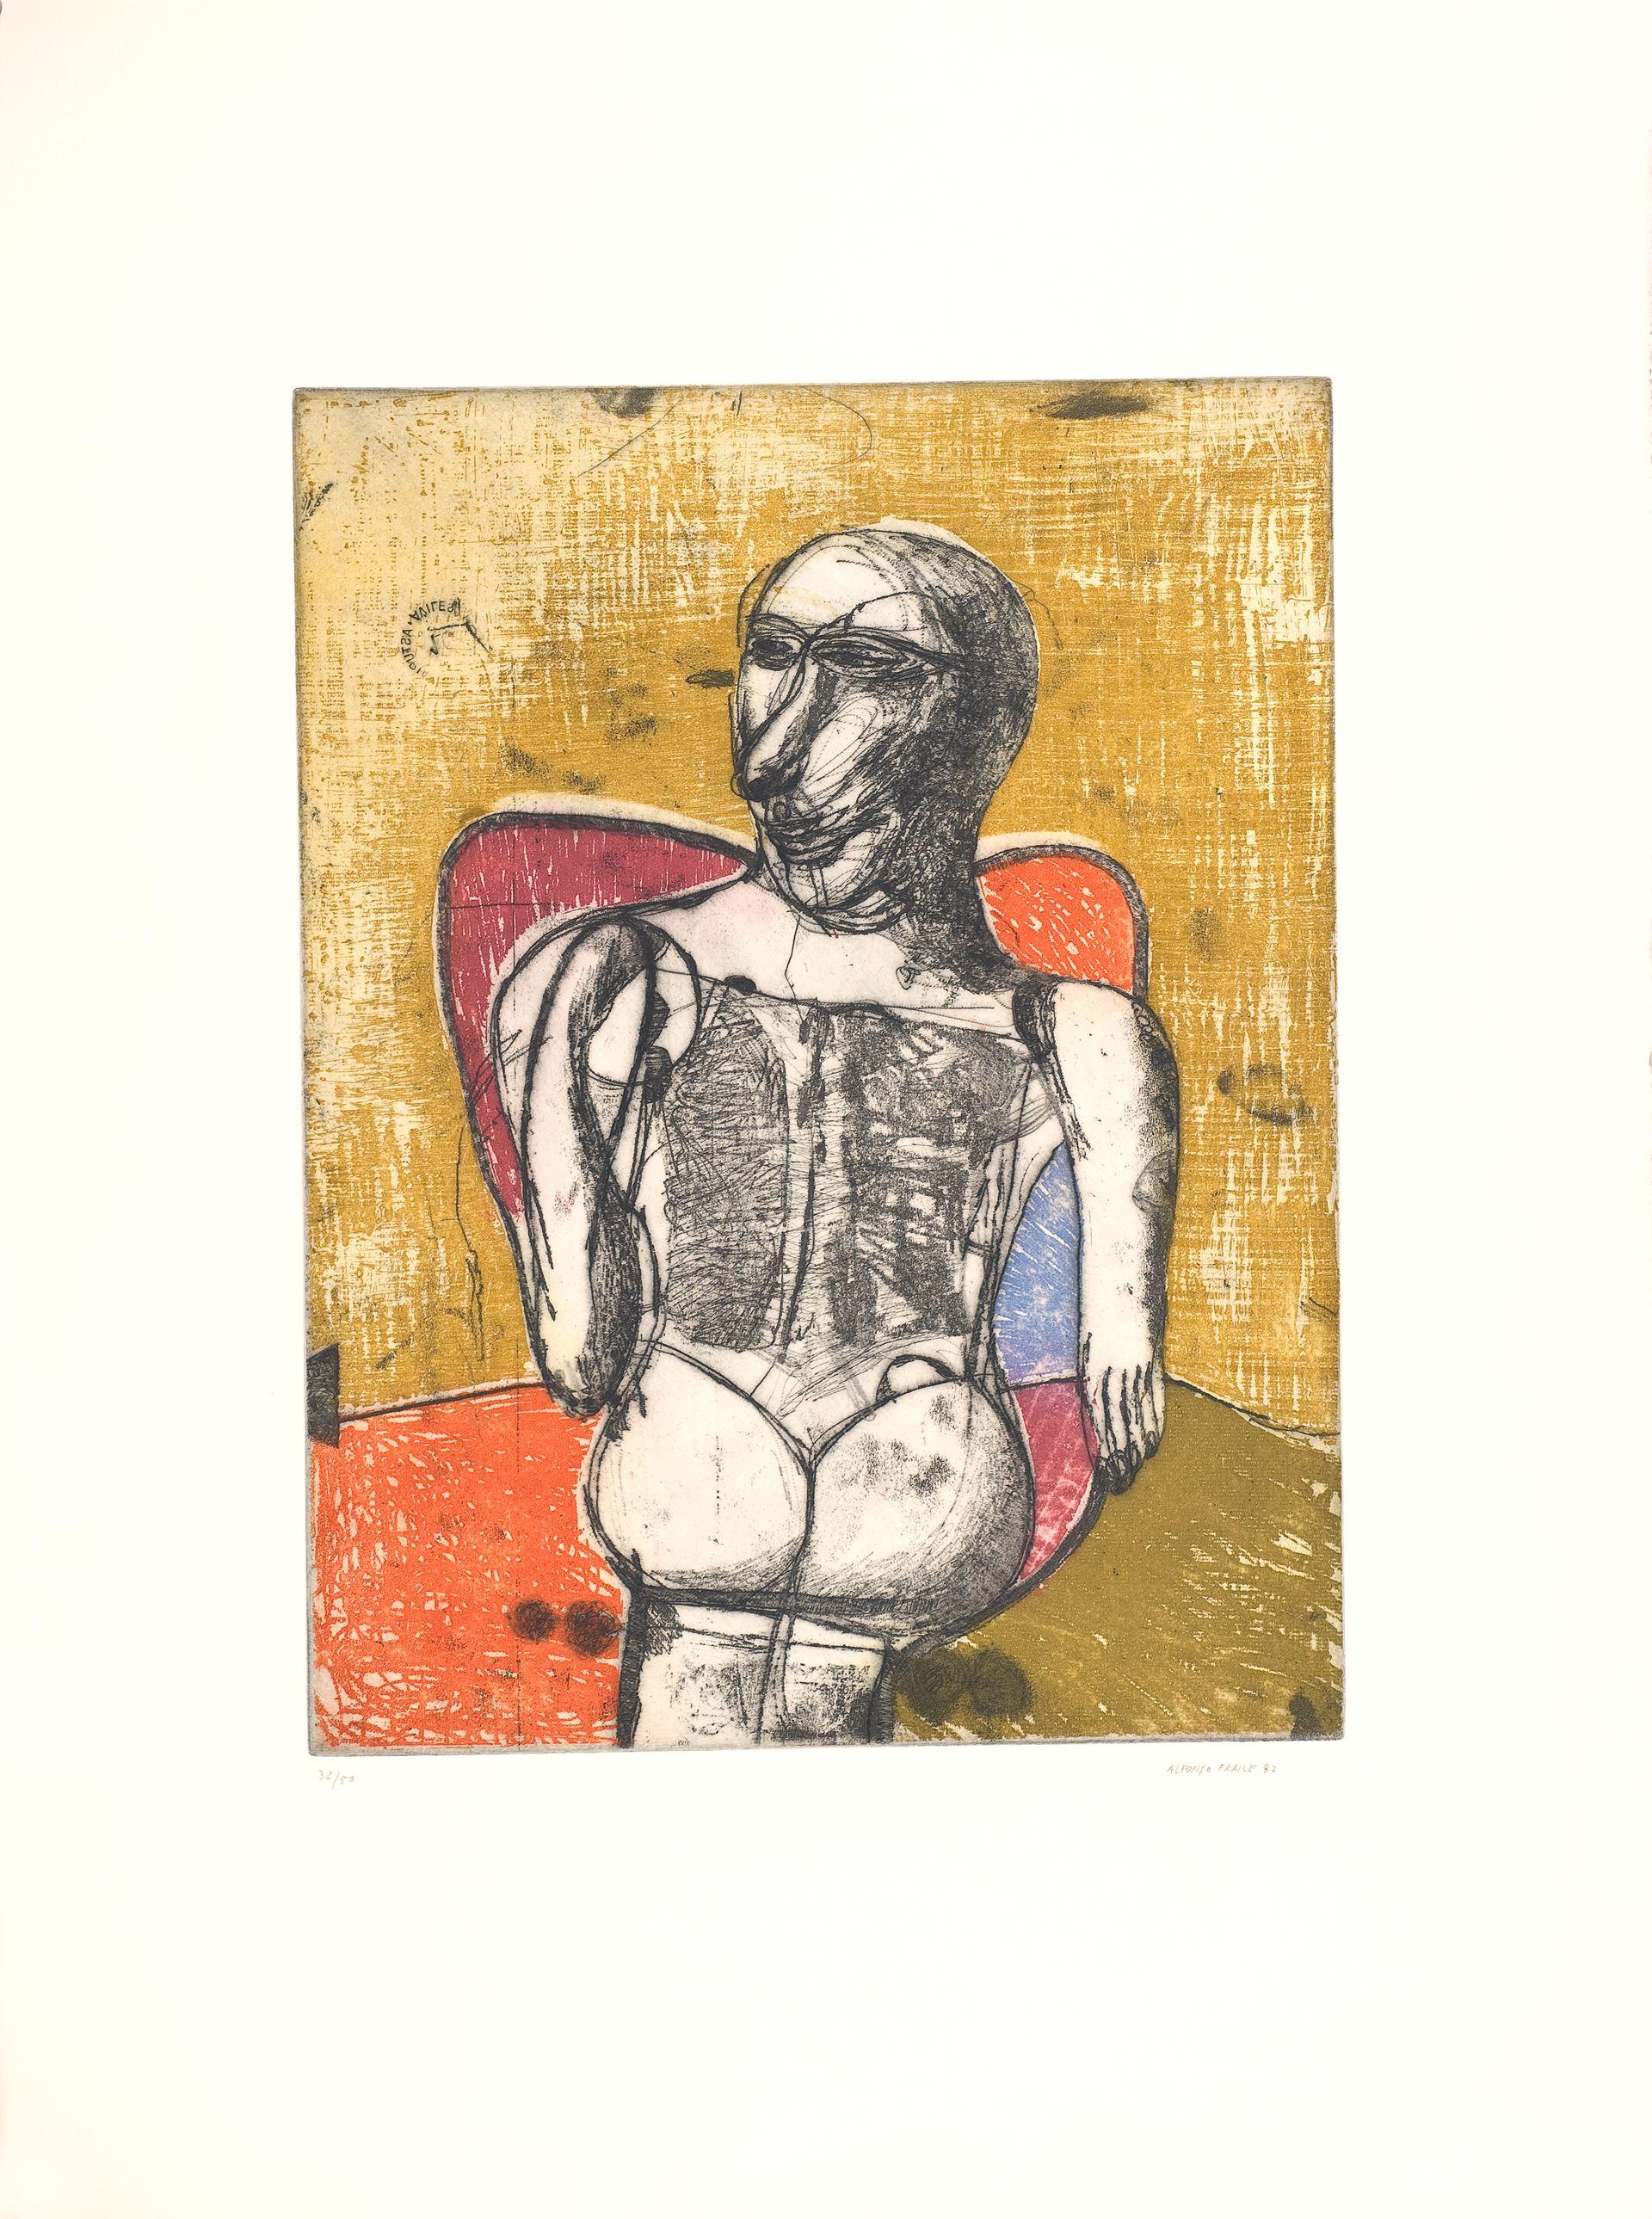 Alfonso Fraile (Spain, 1930-1988)
'Personaje I', 1987
engraving on paper
30 x 22.1 in. (76 x 56 cm.)
Edition of 50
ID: FRA1262-004-050
Hand-signed by author
_____________________________________________
Alfonso Fraile was a Spanish painter. He was